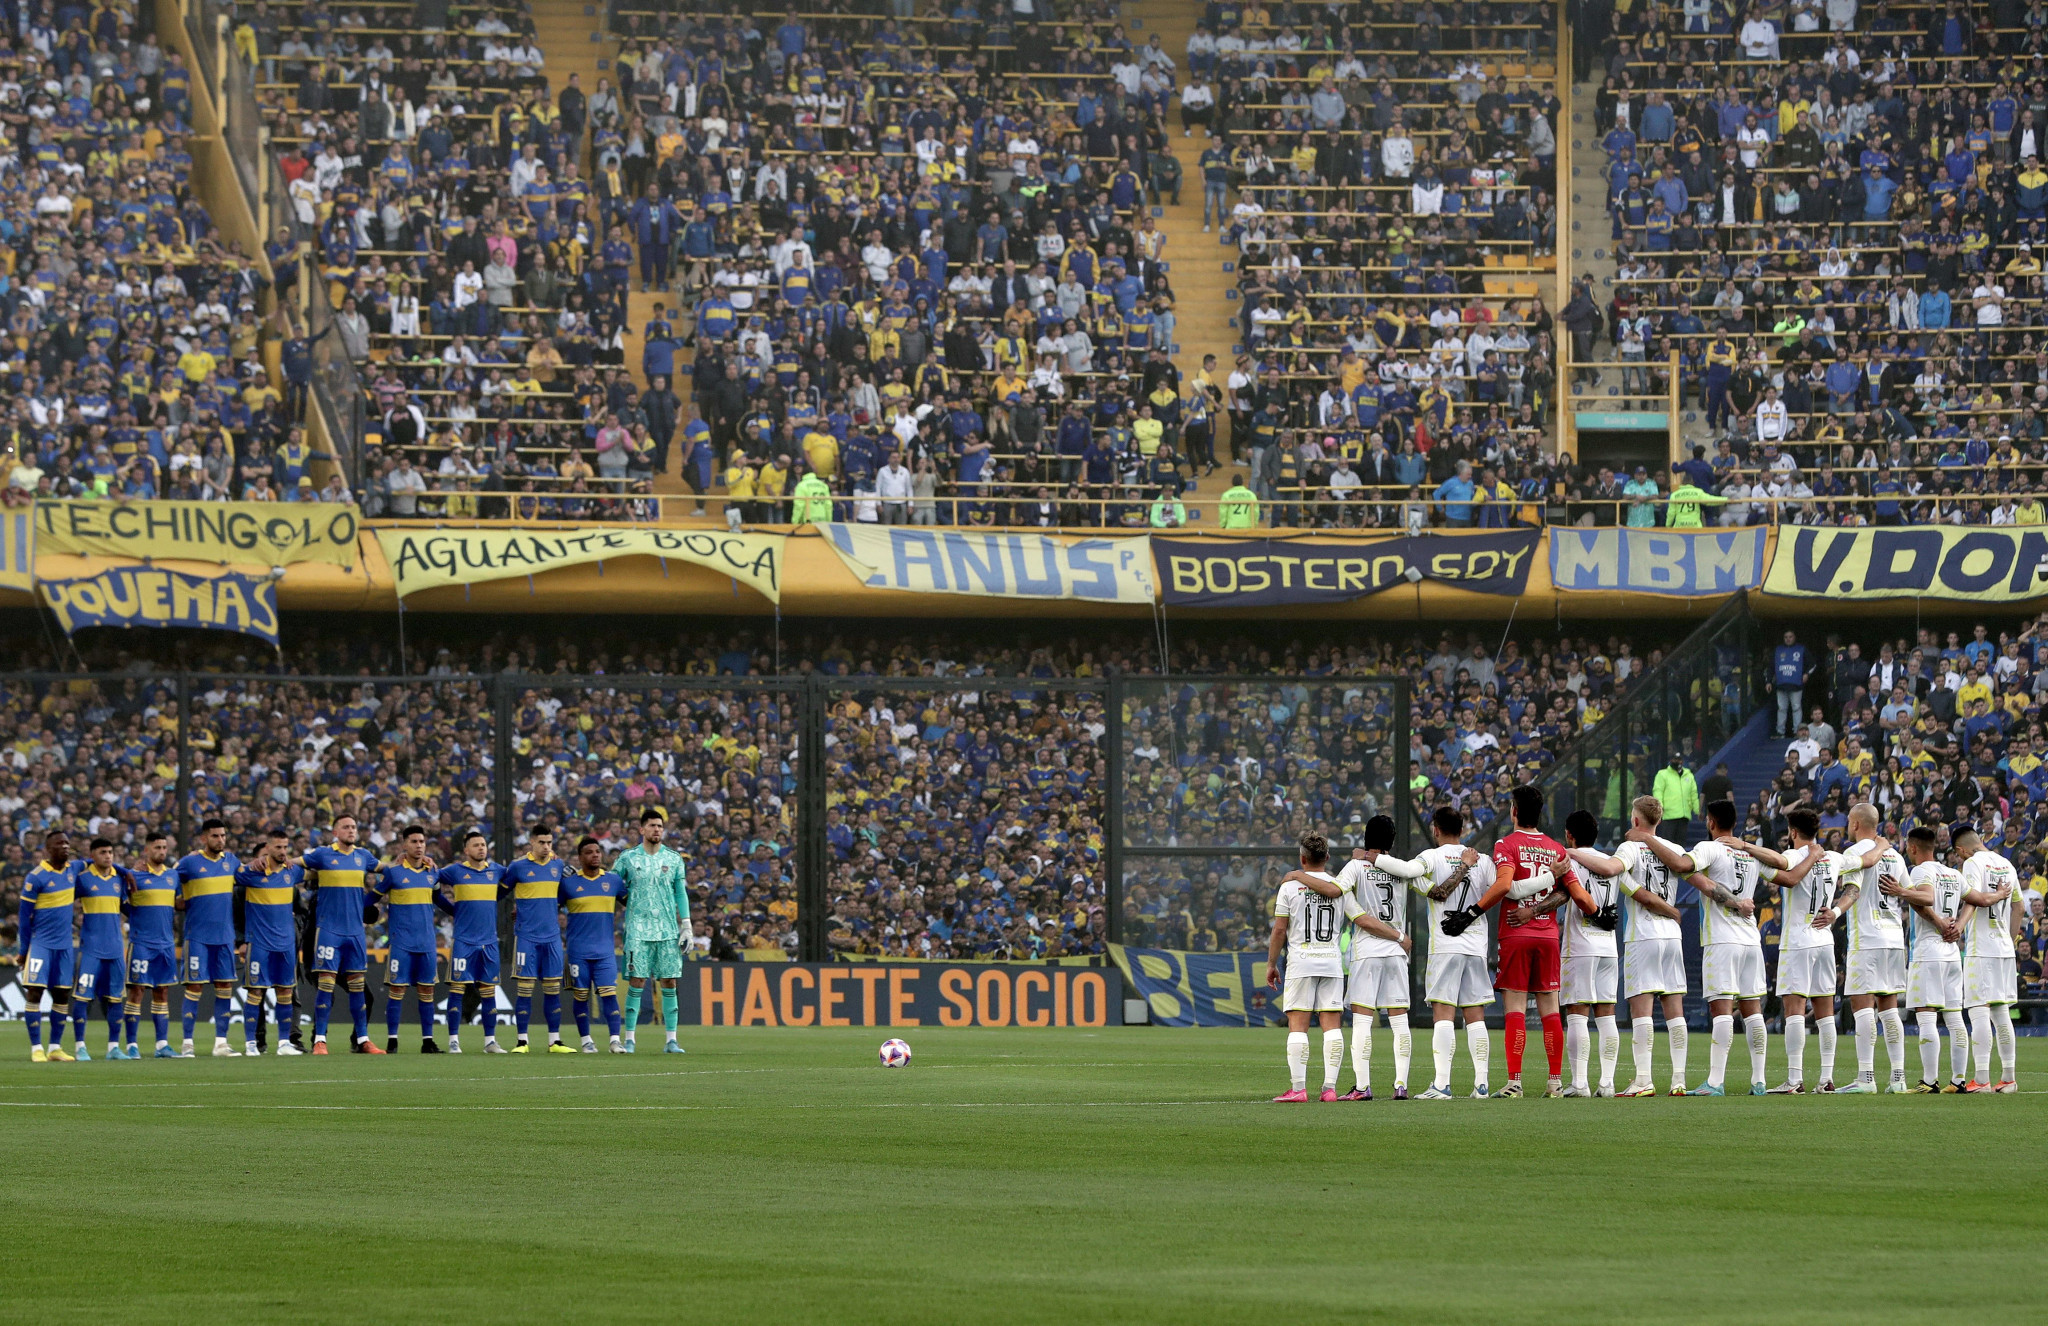 Players and fans stand in remembrance of a fan who died during crowd disturbances last month in Buenos Aires ©Getty Images